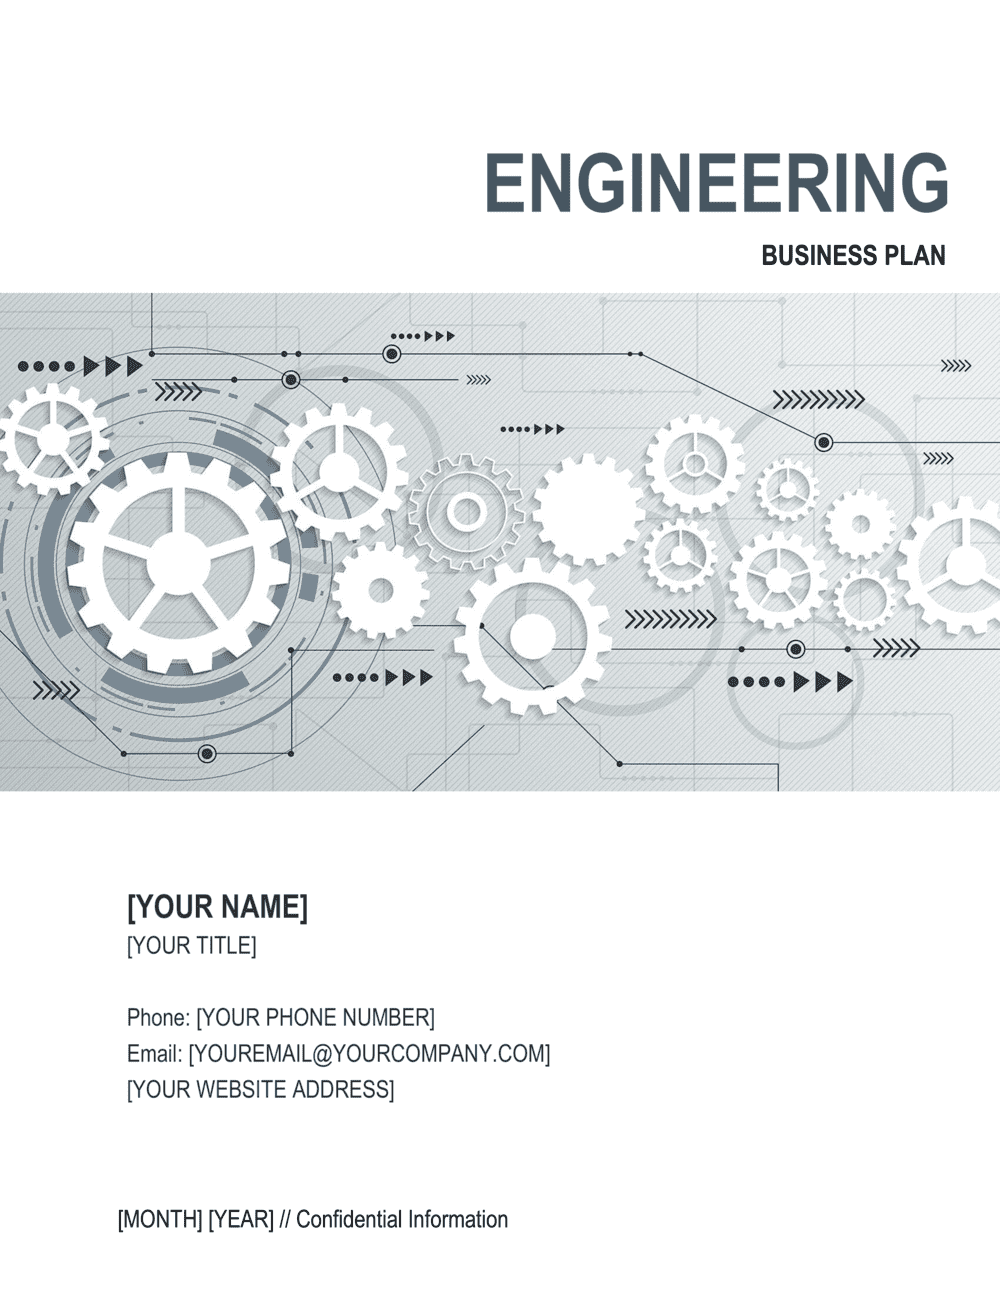 business plan for engineering consulting company